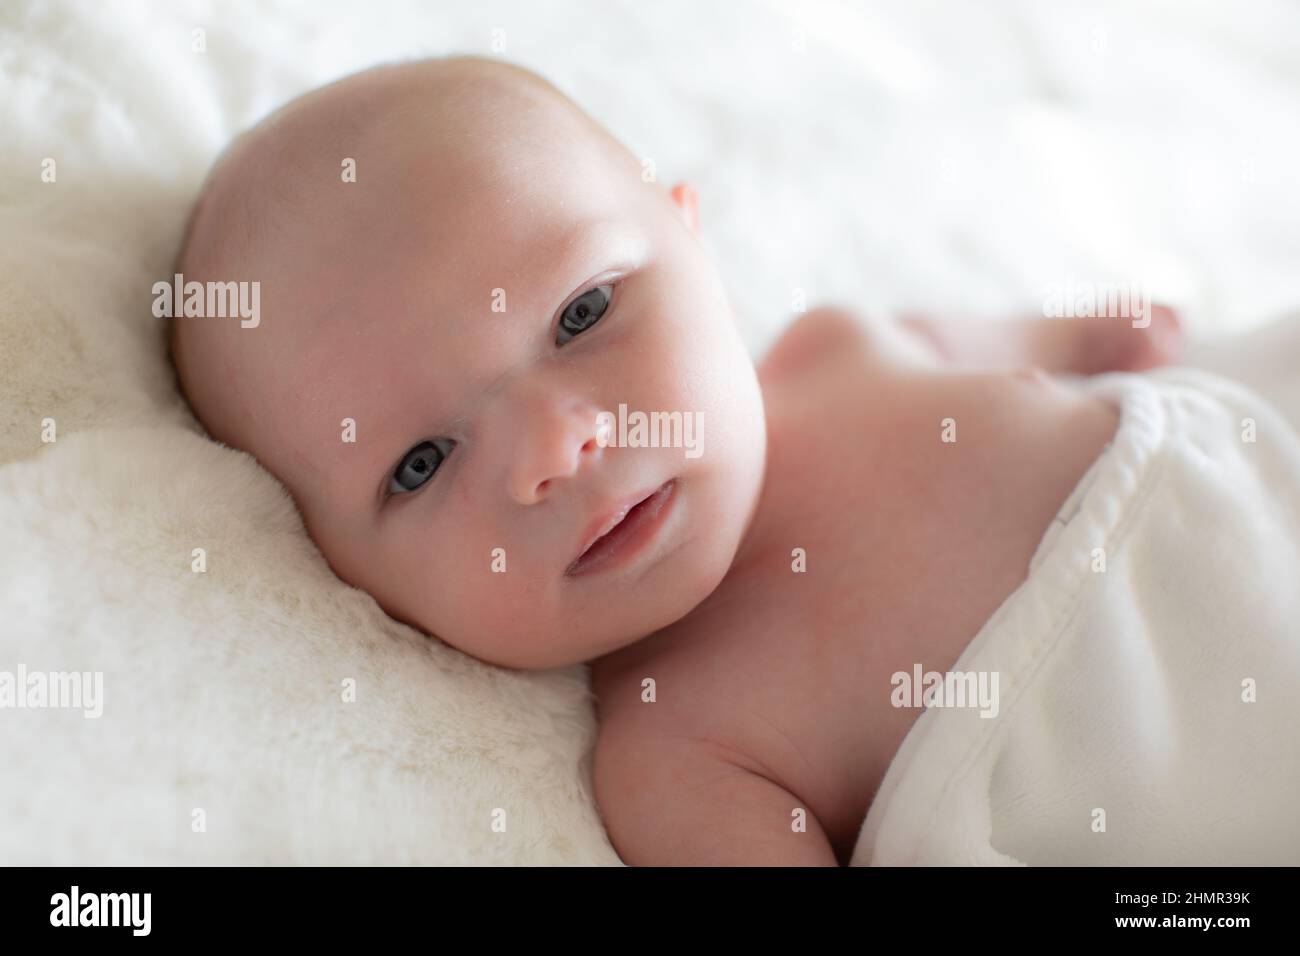 A portrait of a newborn baby awake and looking at the camera. Stock Photo